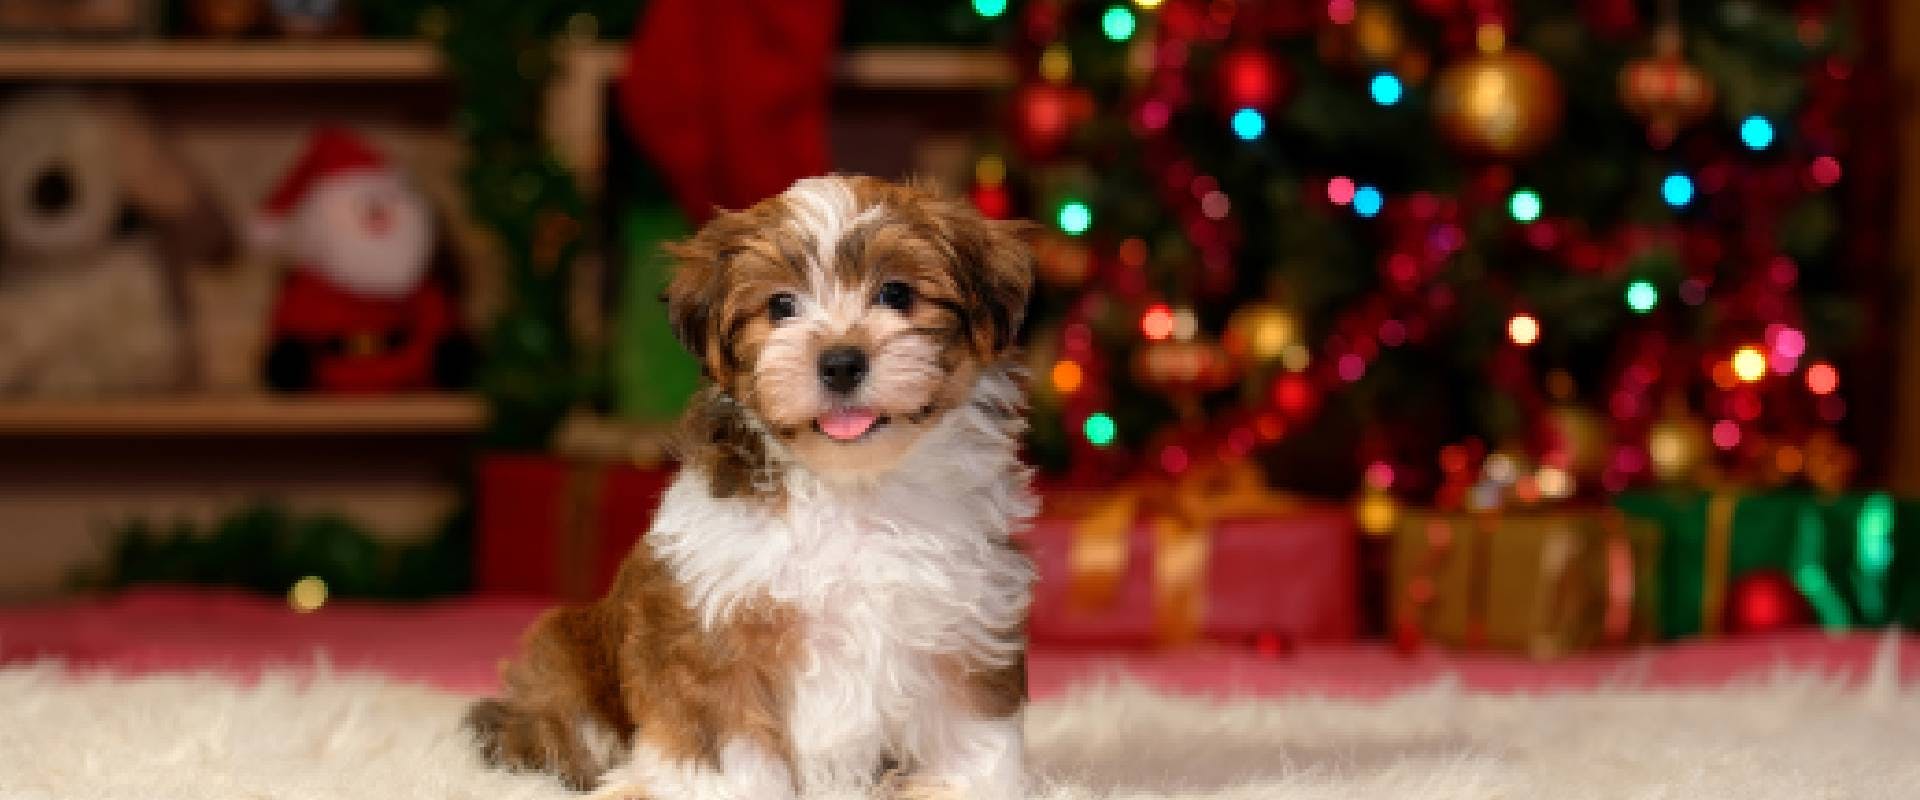 Havanese puppy is sitting in front of a Christmas tree background